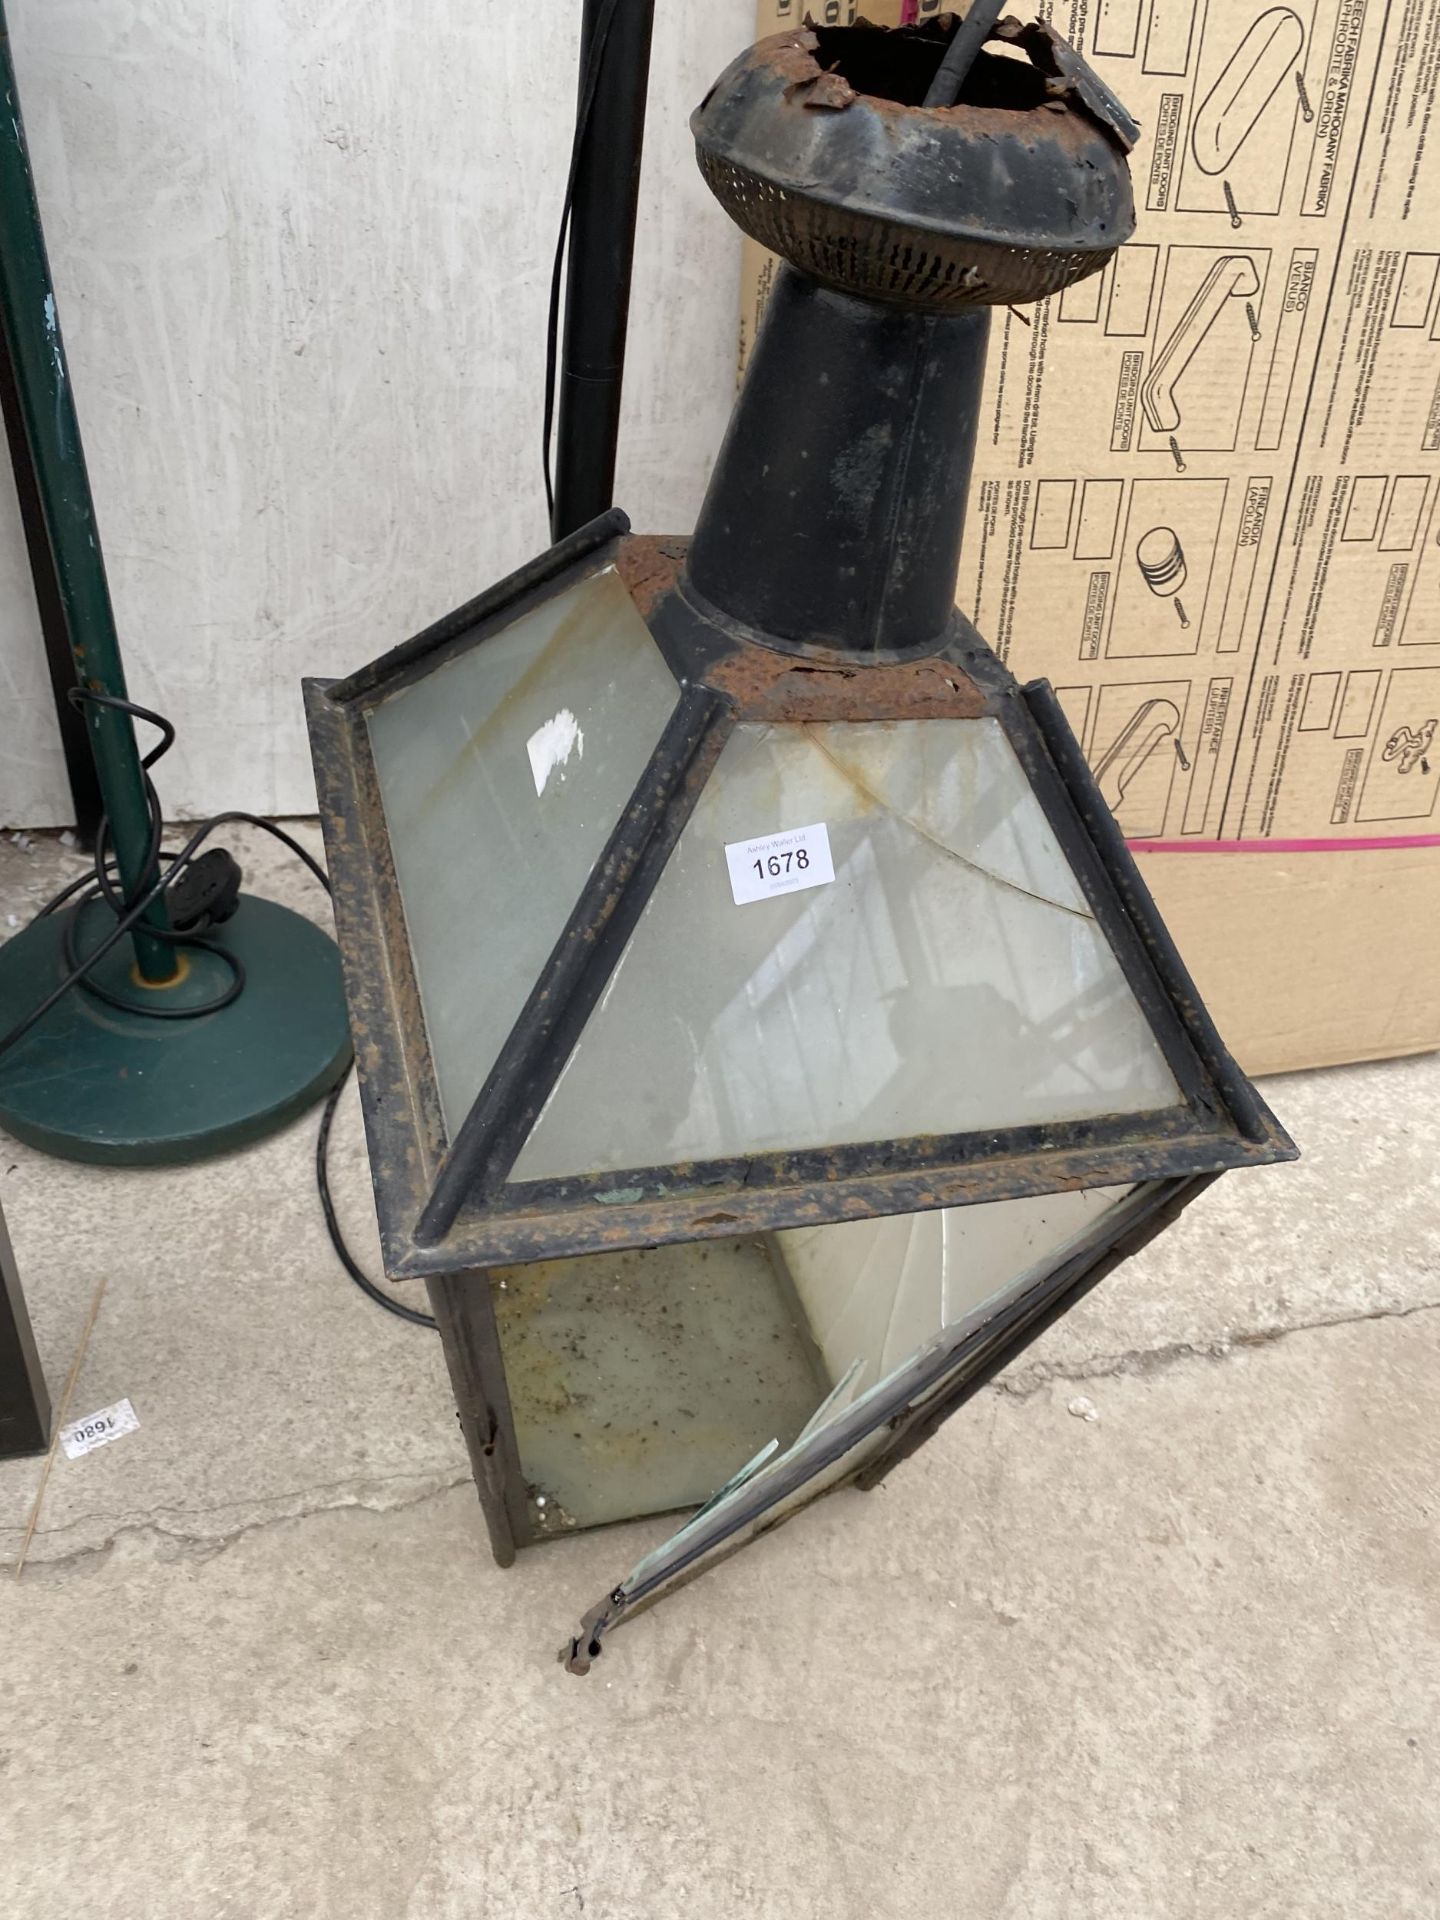 TWO STANDARD LAMPS AND A VINTAGE COURTYARD LIGHT - Image 2 of 3